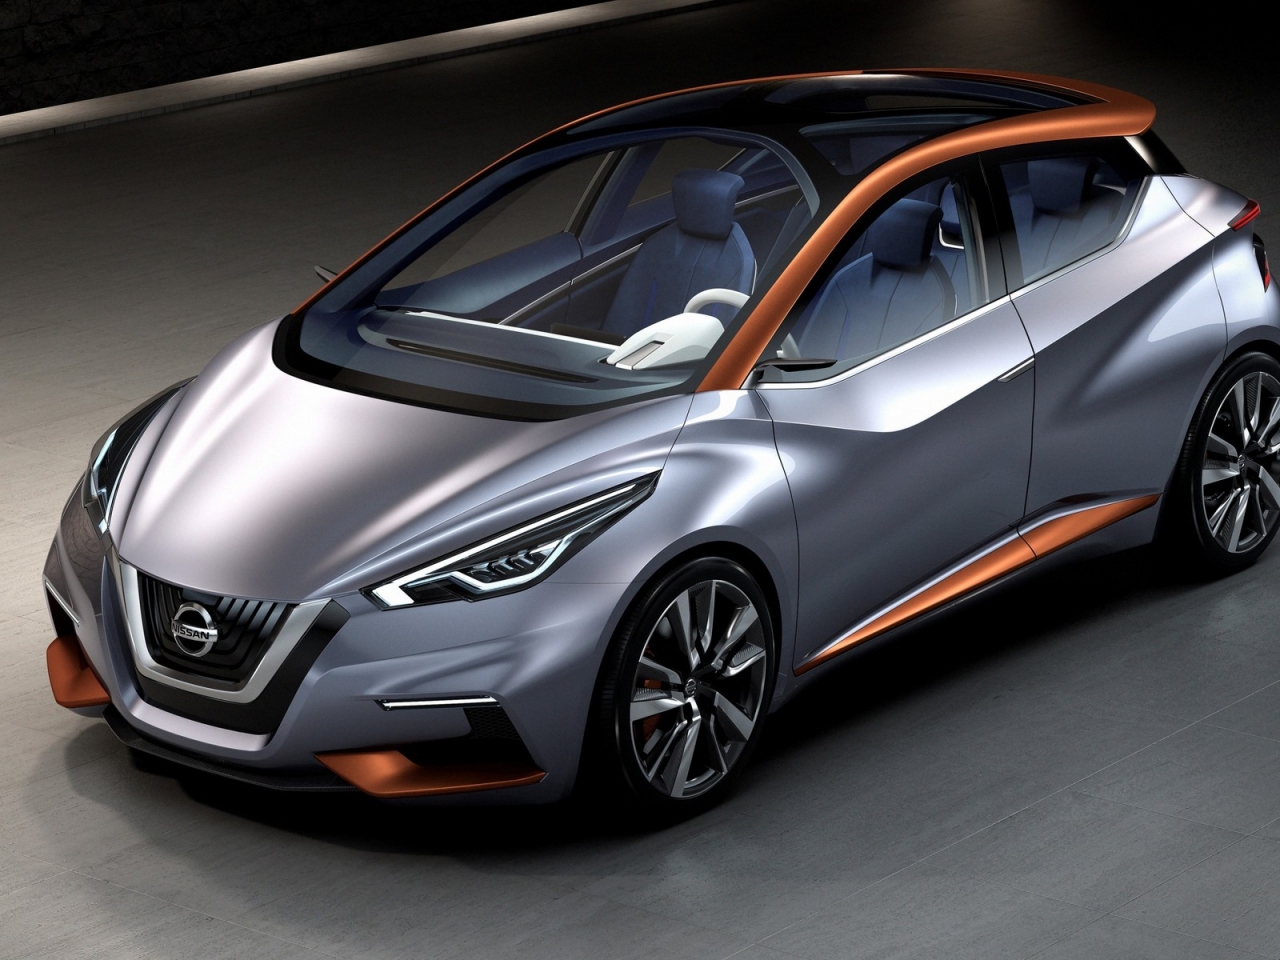 2015 Nissan Sway Concept for 1280 x 960 resolution